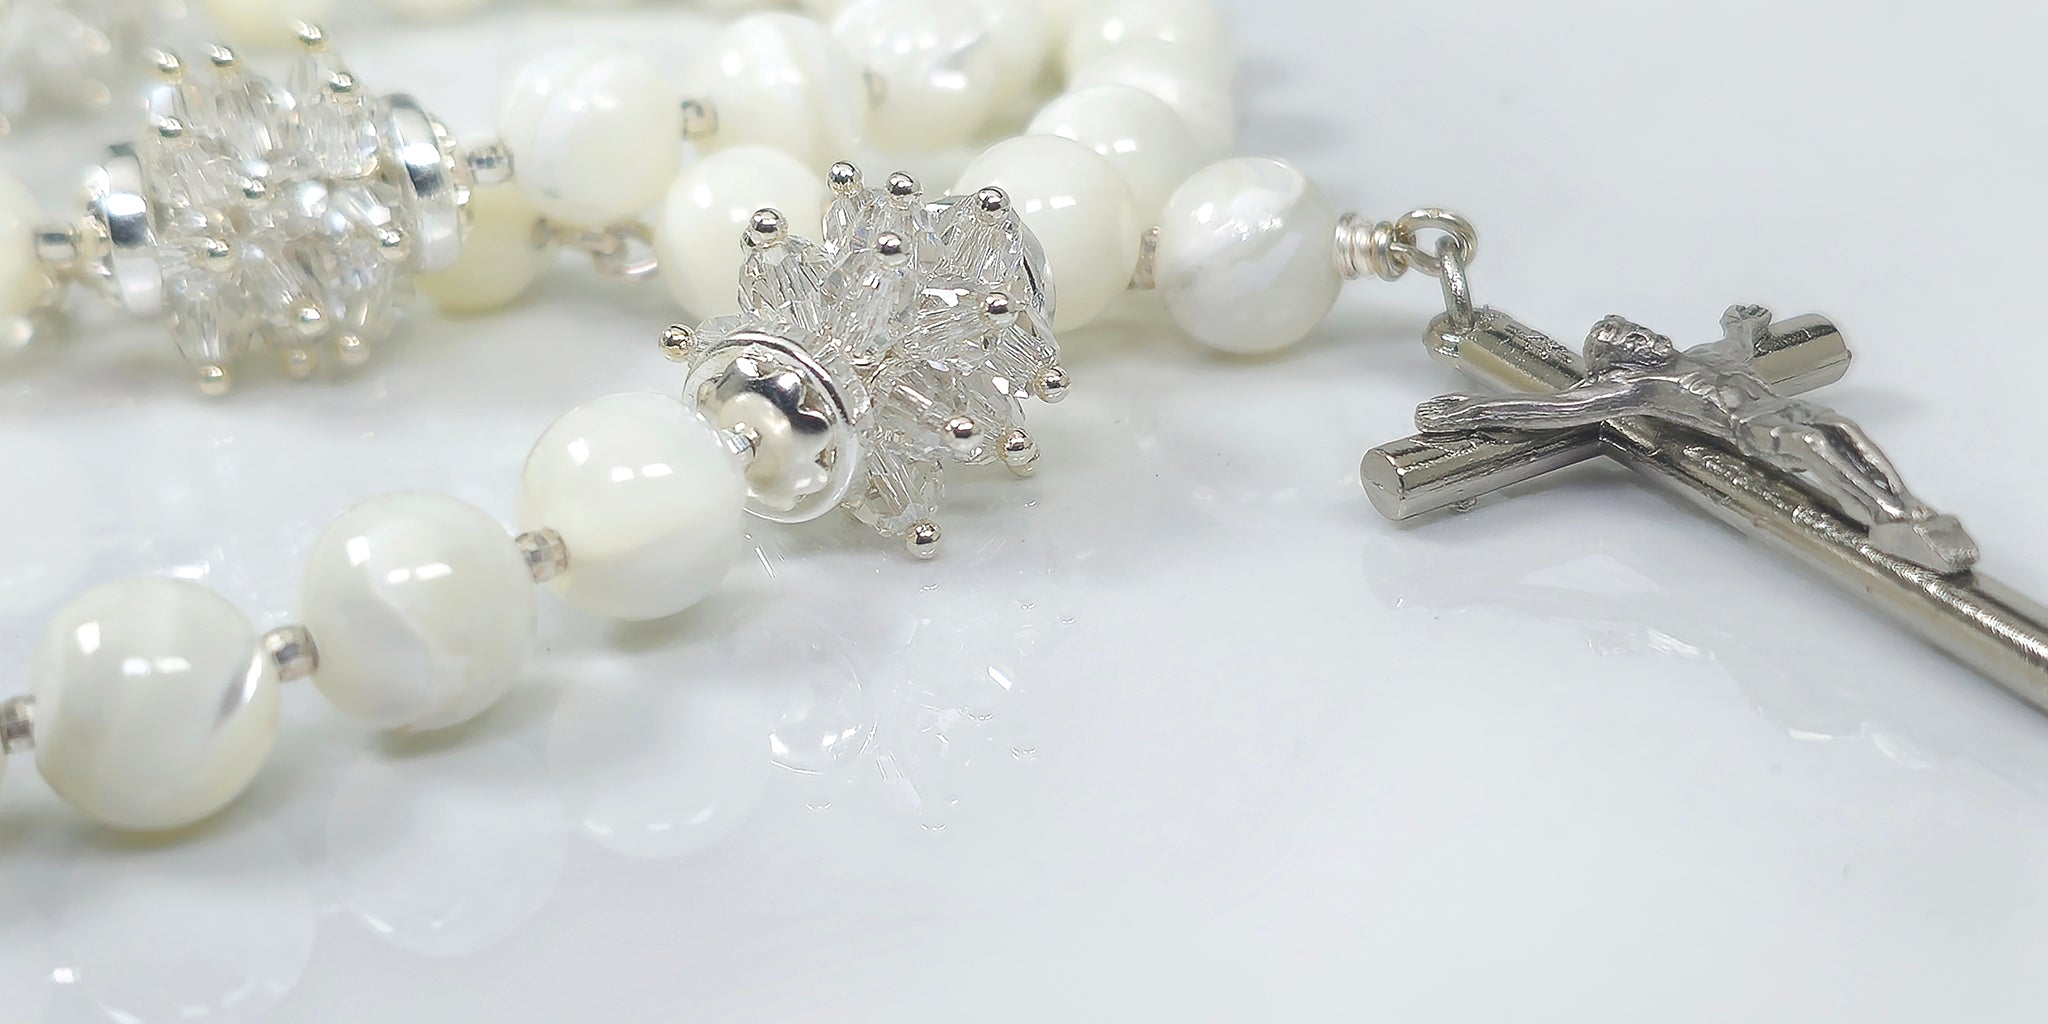 White Mother of Pearl Rosary adorned with silver white Swarovski crystal and sterling silver findings on top of a white top.